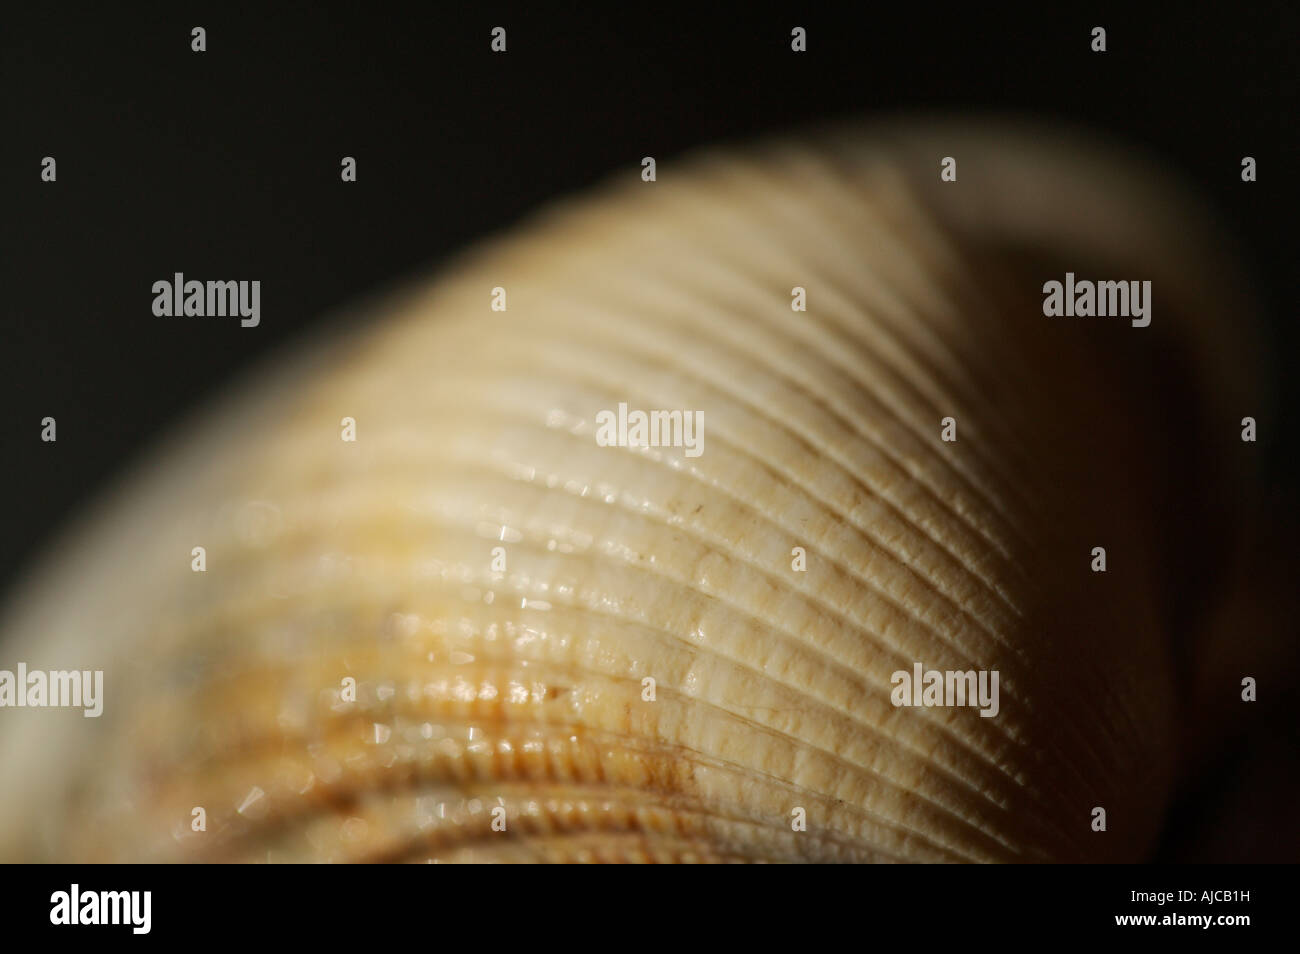 Sea shells with a shallow depth of field Stock Photo